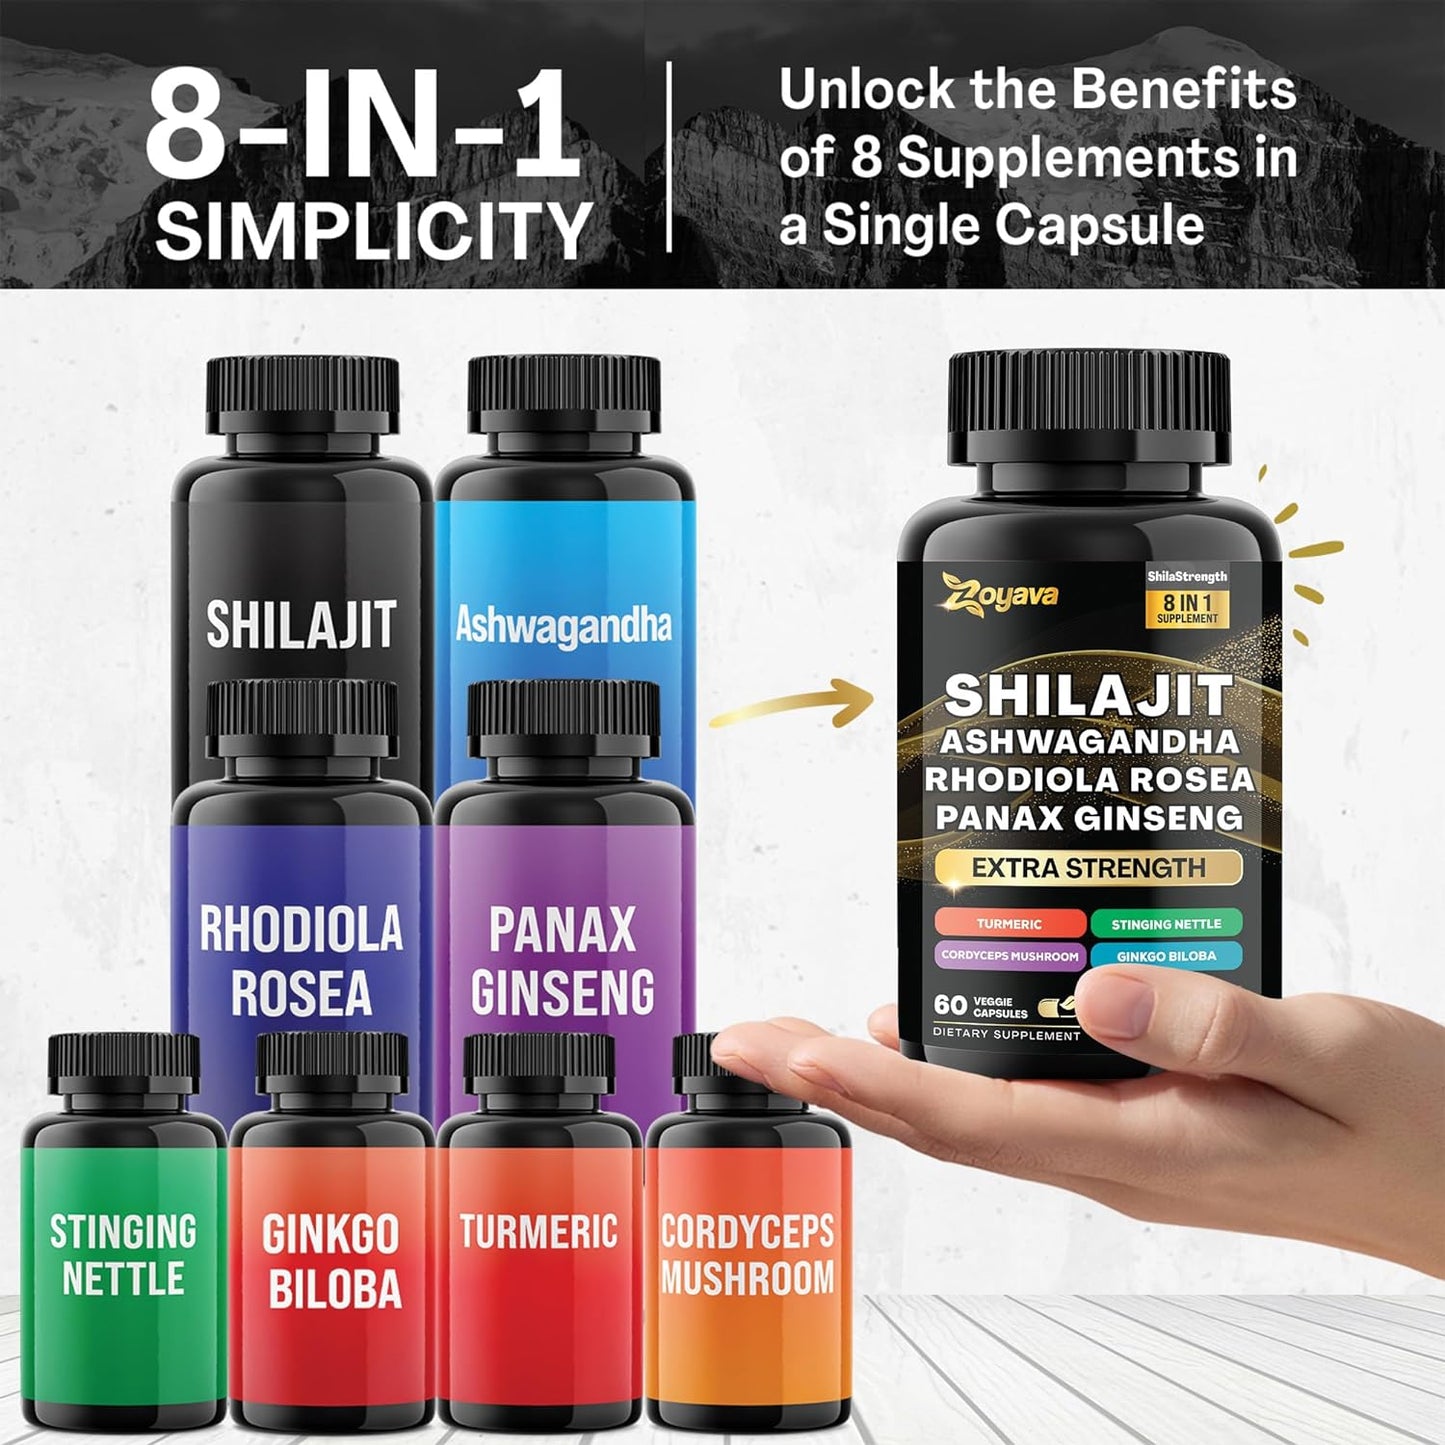 Sea Moss 16-In-1 and Collagen 14-In-1 + Shilajit 8-In-1 Supplement Bundle - 30 Day Supply